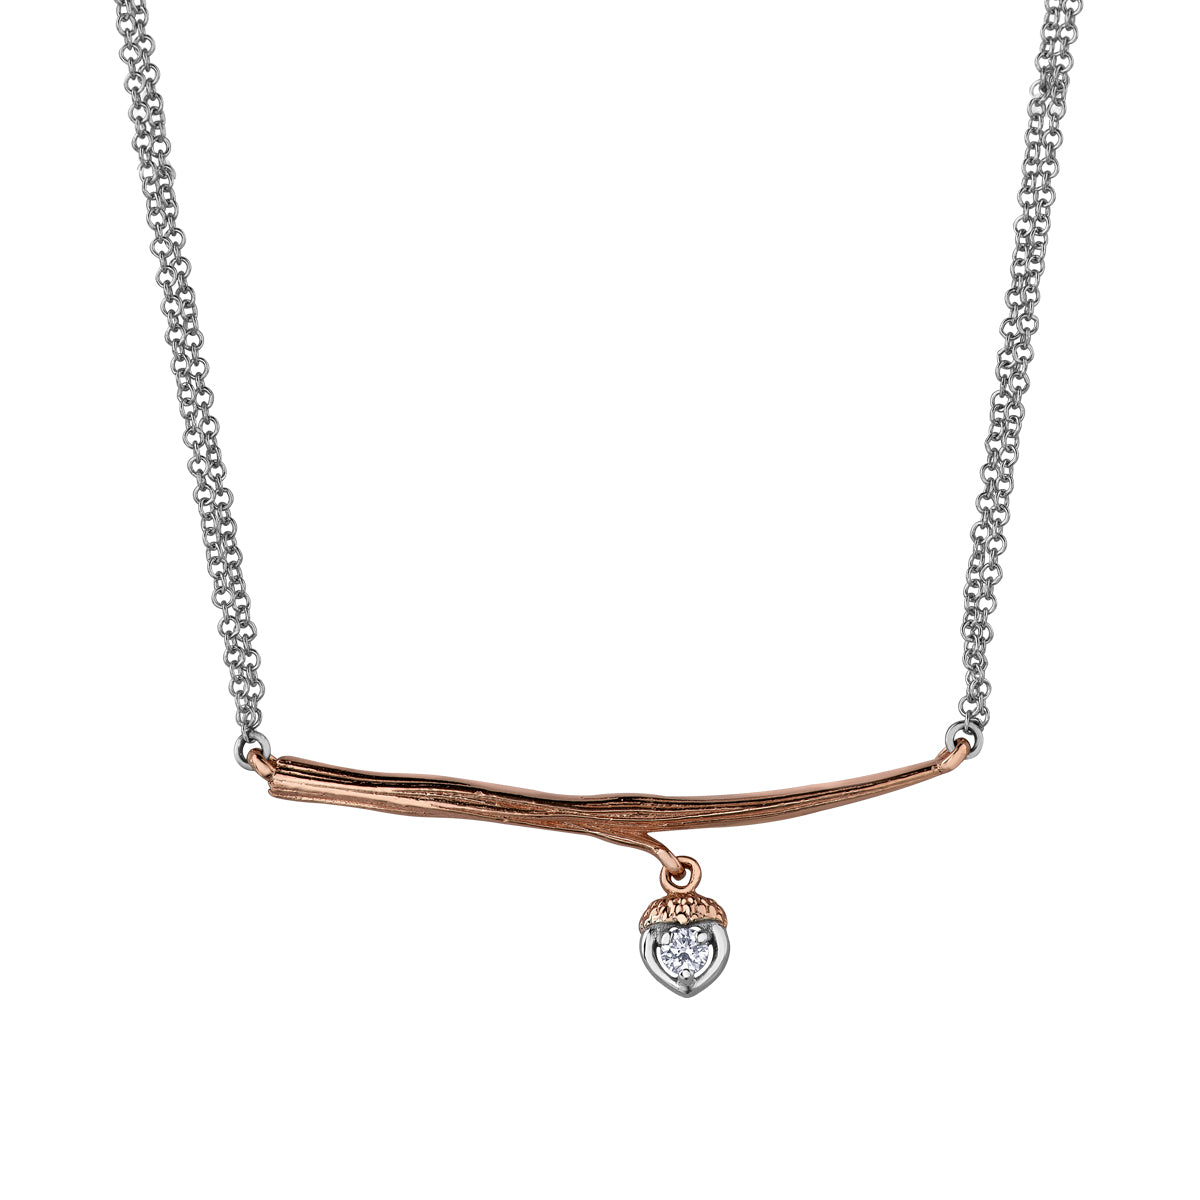 Crafted in 14KT rose Canadian Certified Gold, this necklace features a branch with an acorn charm set with a round brilliant-cut Canadian diamond. 